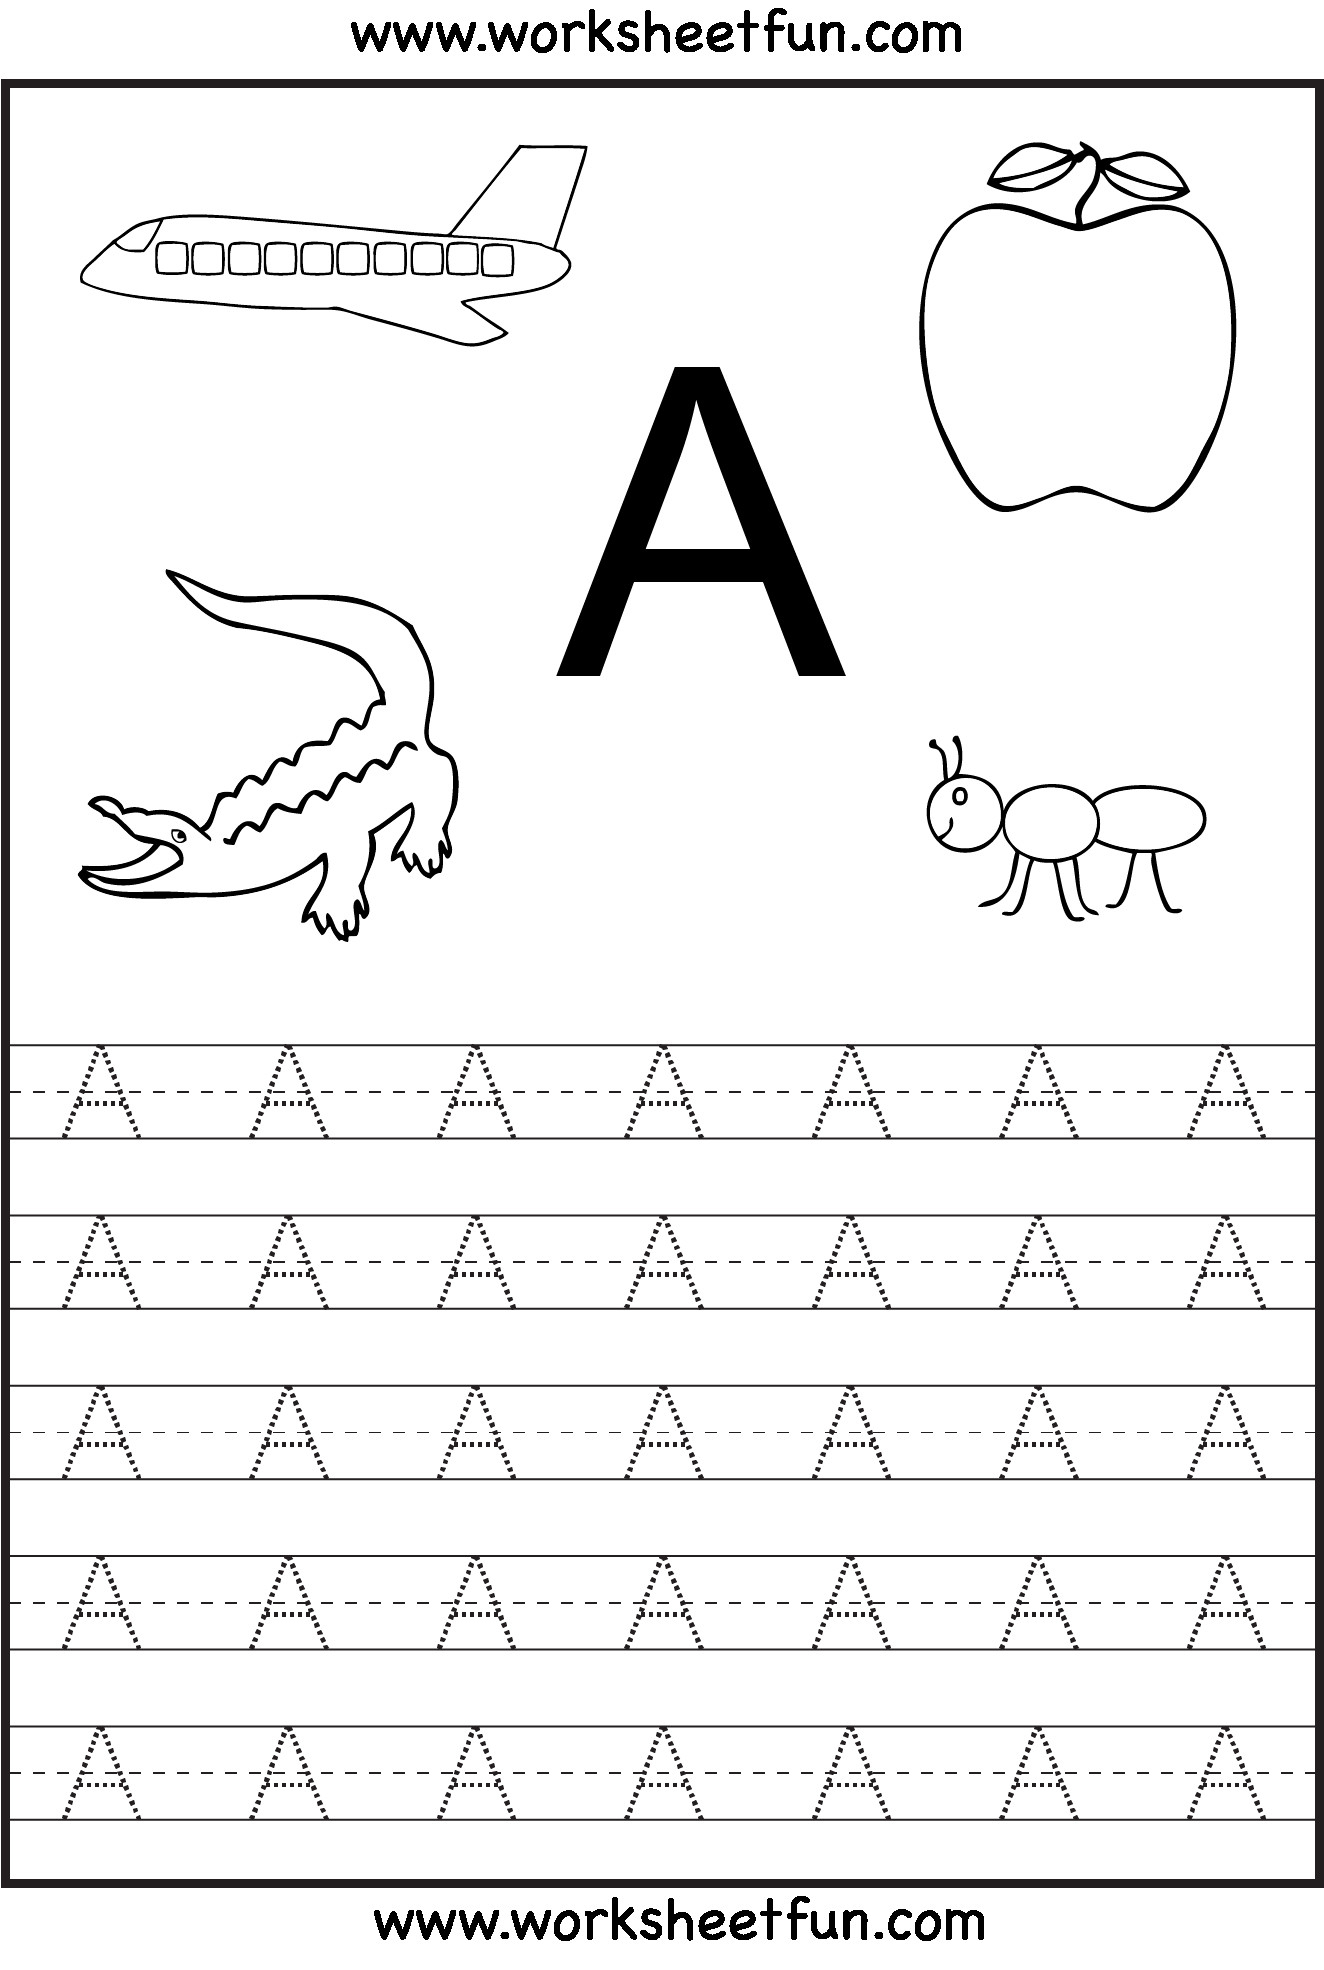 5 Worksheets For 3 Year Olds Tracing 001 – Learning Worksheets within Printable Alphabet Worksheets For 3 Year Olds